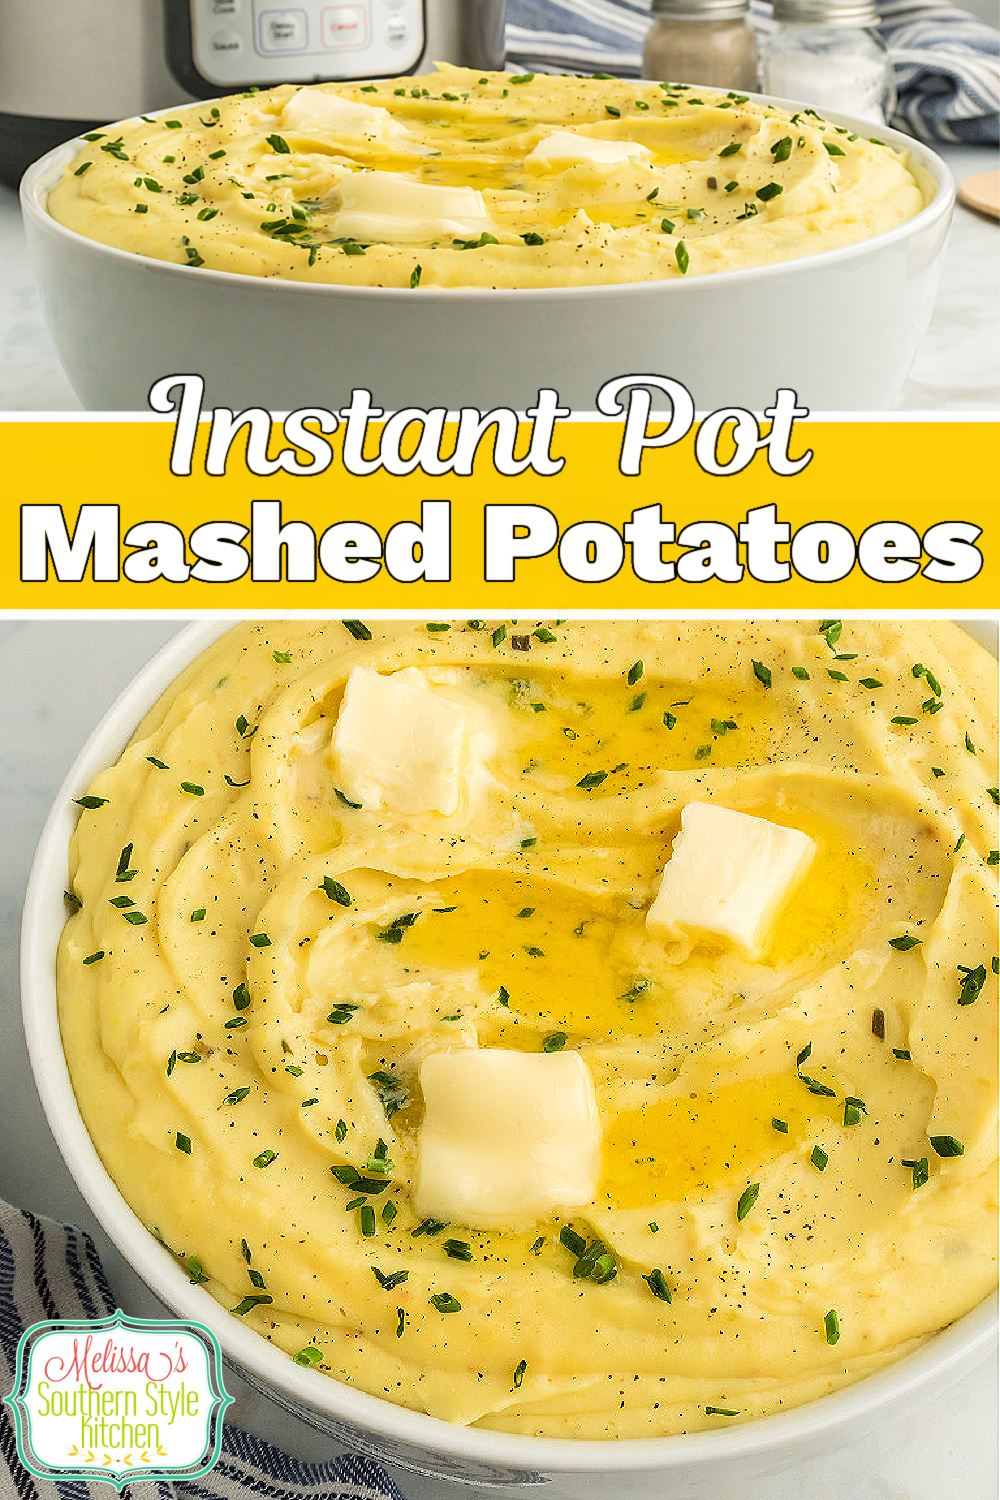 These creamy Instant Pot Mashed Potatoes are buttery and full flavored making them the perfect side dish option for any occasion #instantpotpotatoes #mashedpotatoes #potatorecipes #easymashedpotatoes #instantpotrecipes #thanksgivingrecipes #potatoes #bestmashedpotatorecipe